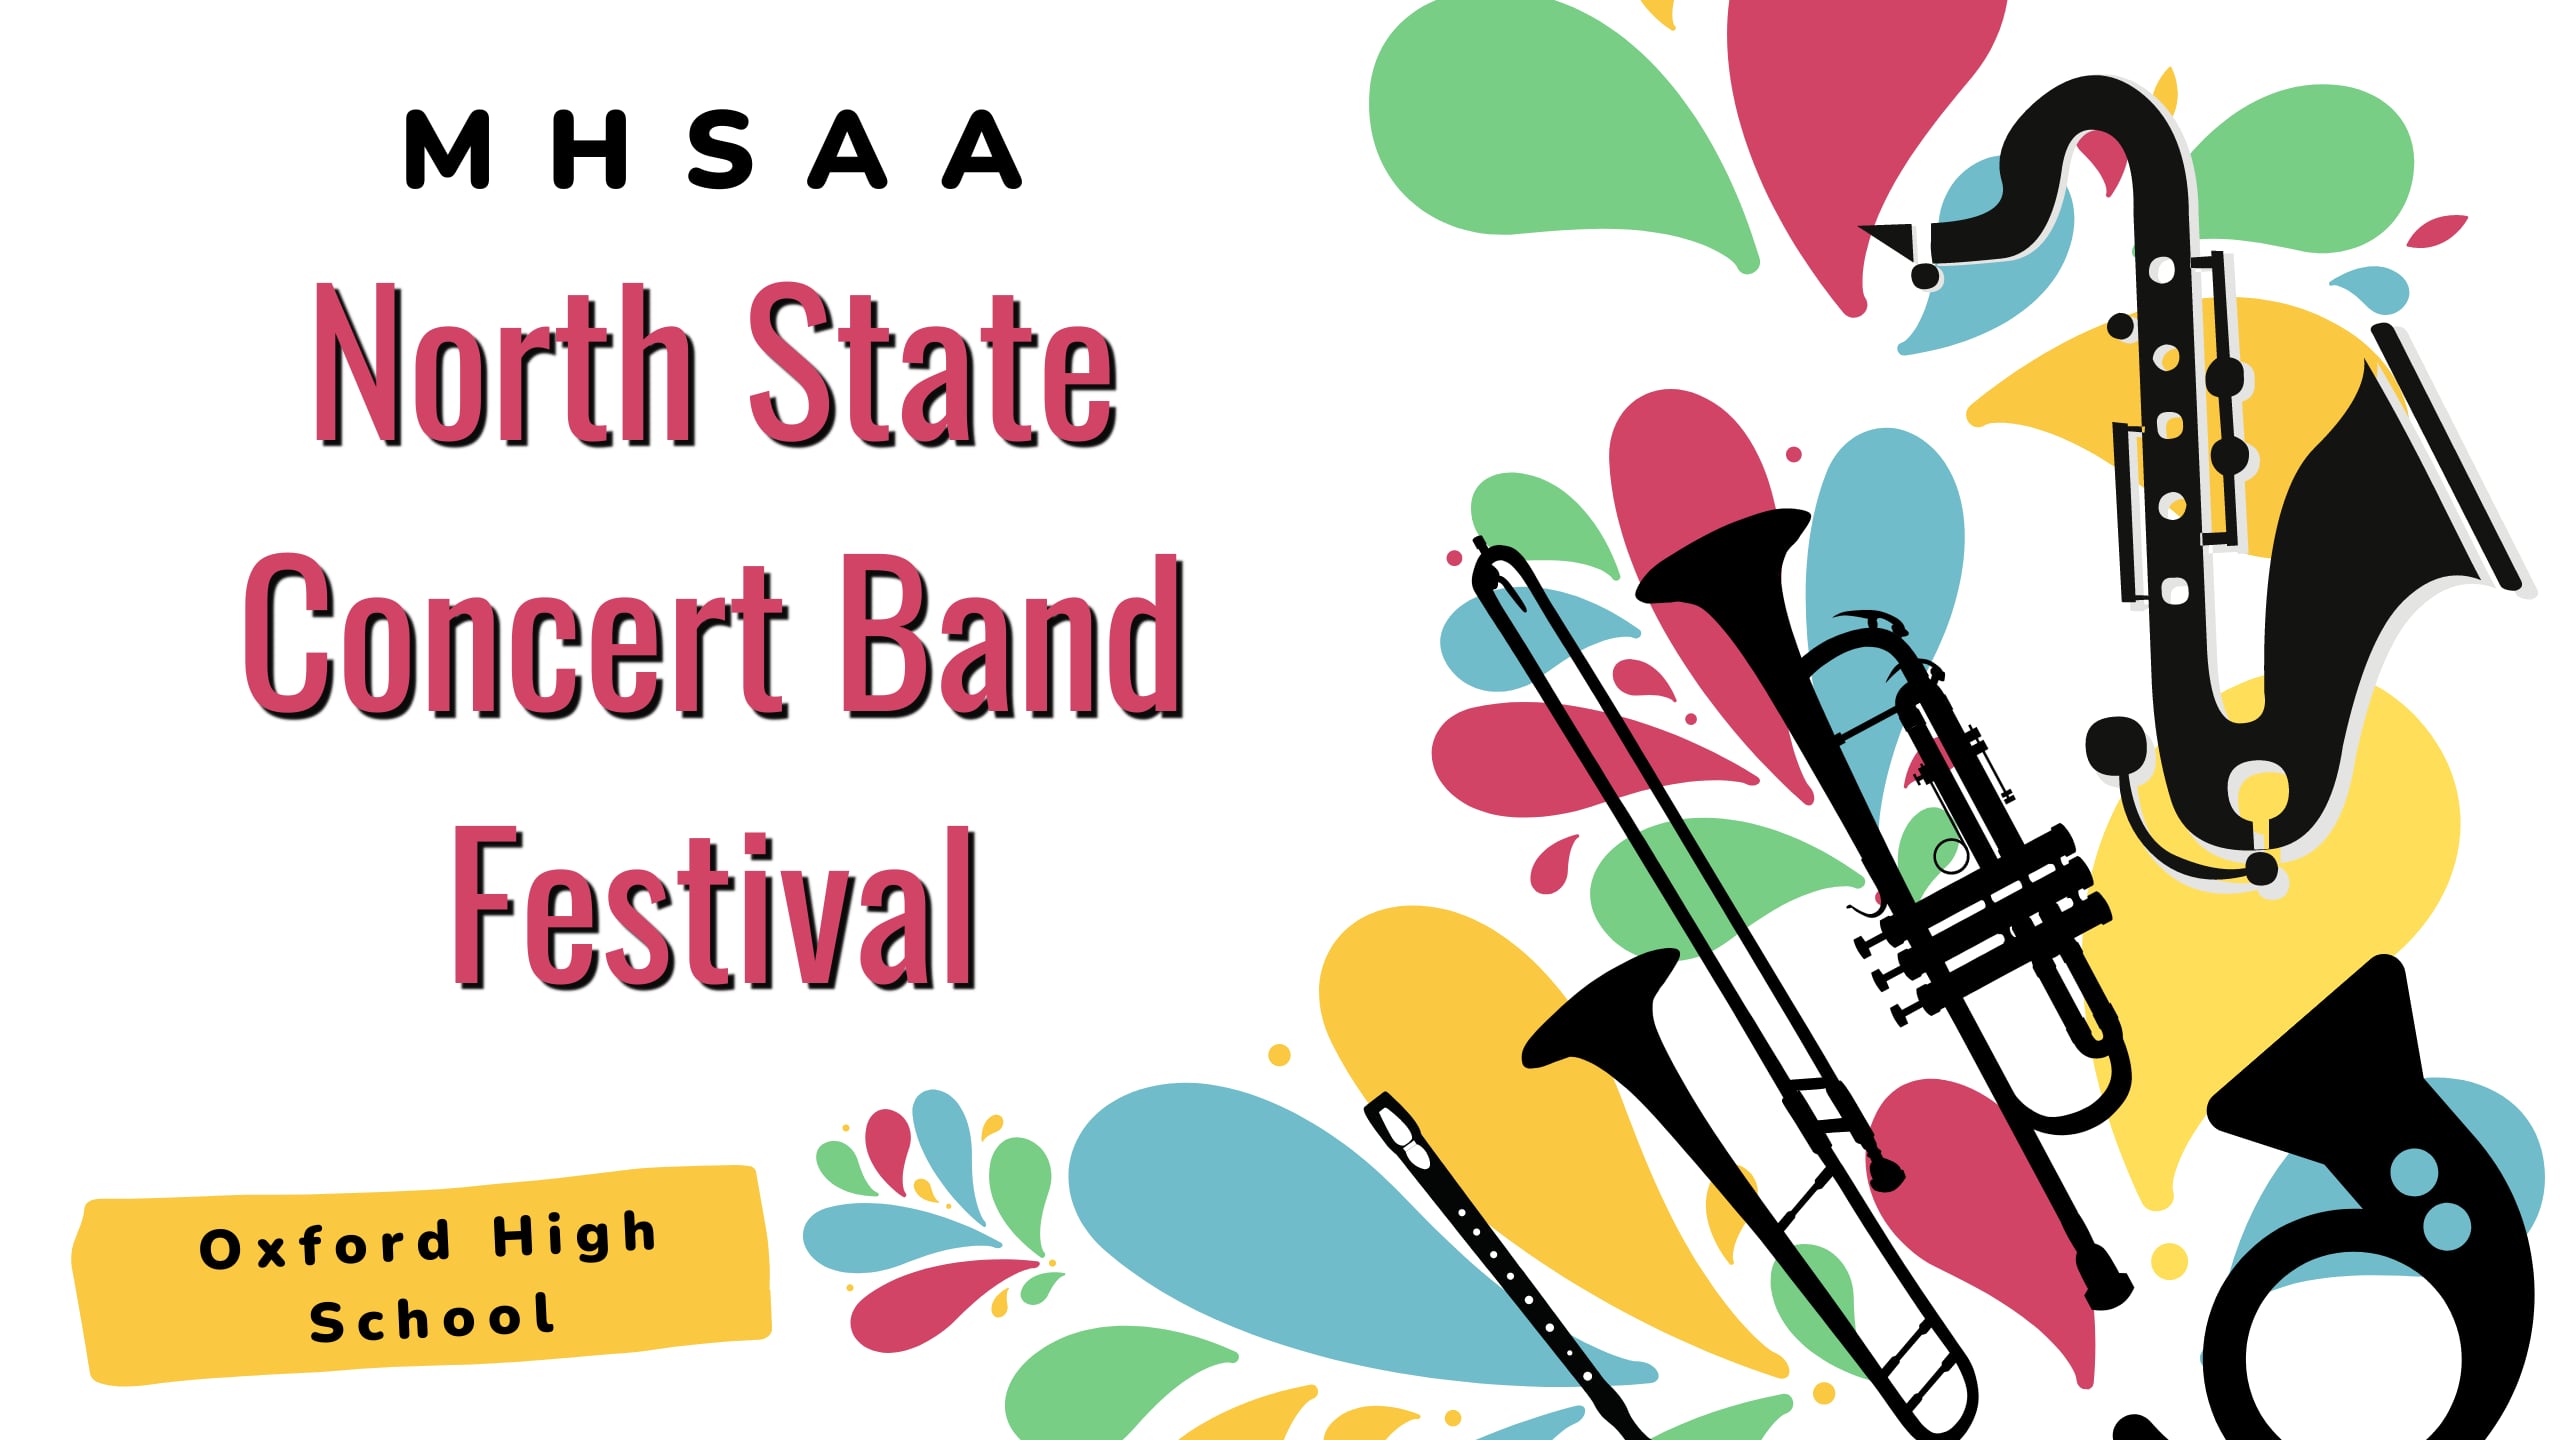 2022 MHSAA North State Concert Band Festival